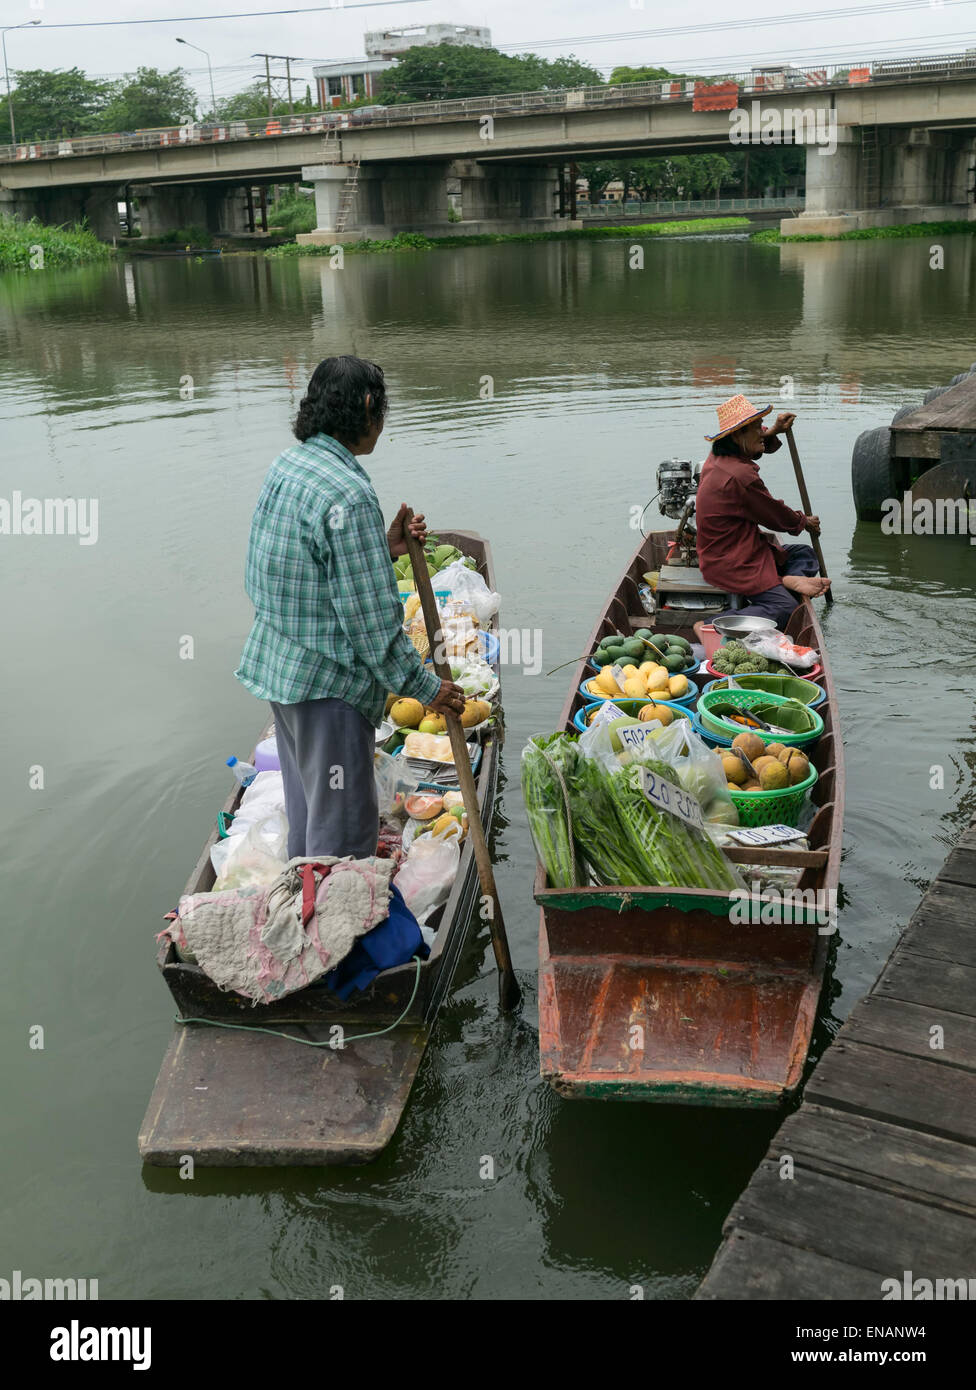 Nakhon Pathom,Thailand- August 3,2014:  Local peoples sell fruits,food and products at Tha Chin river Stock Photo